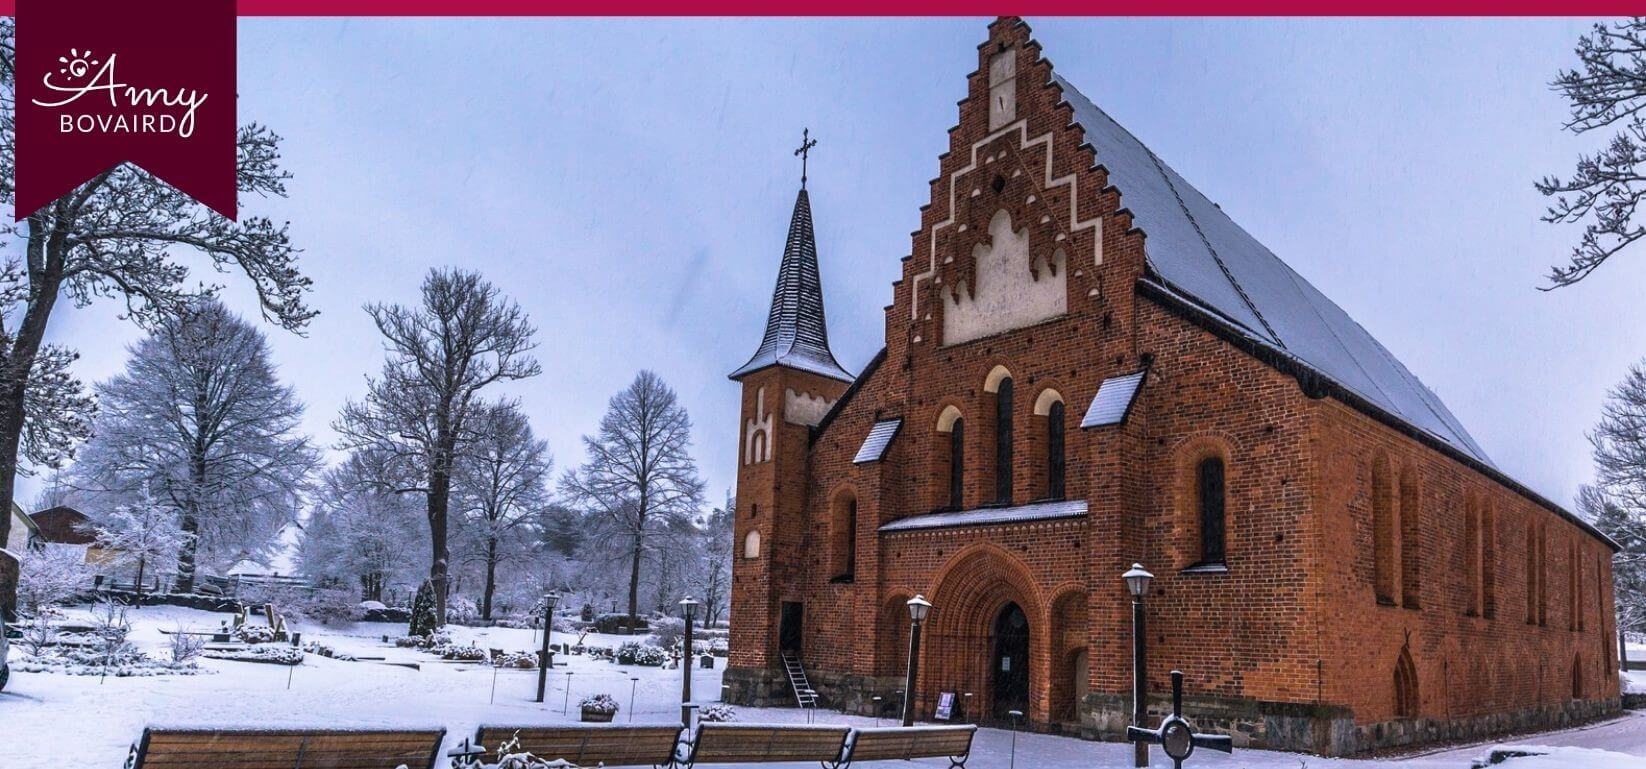 traditional old brick church in winter scene - blog featured image